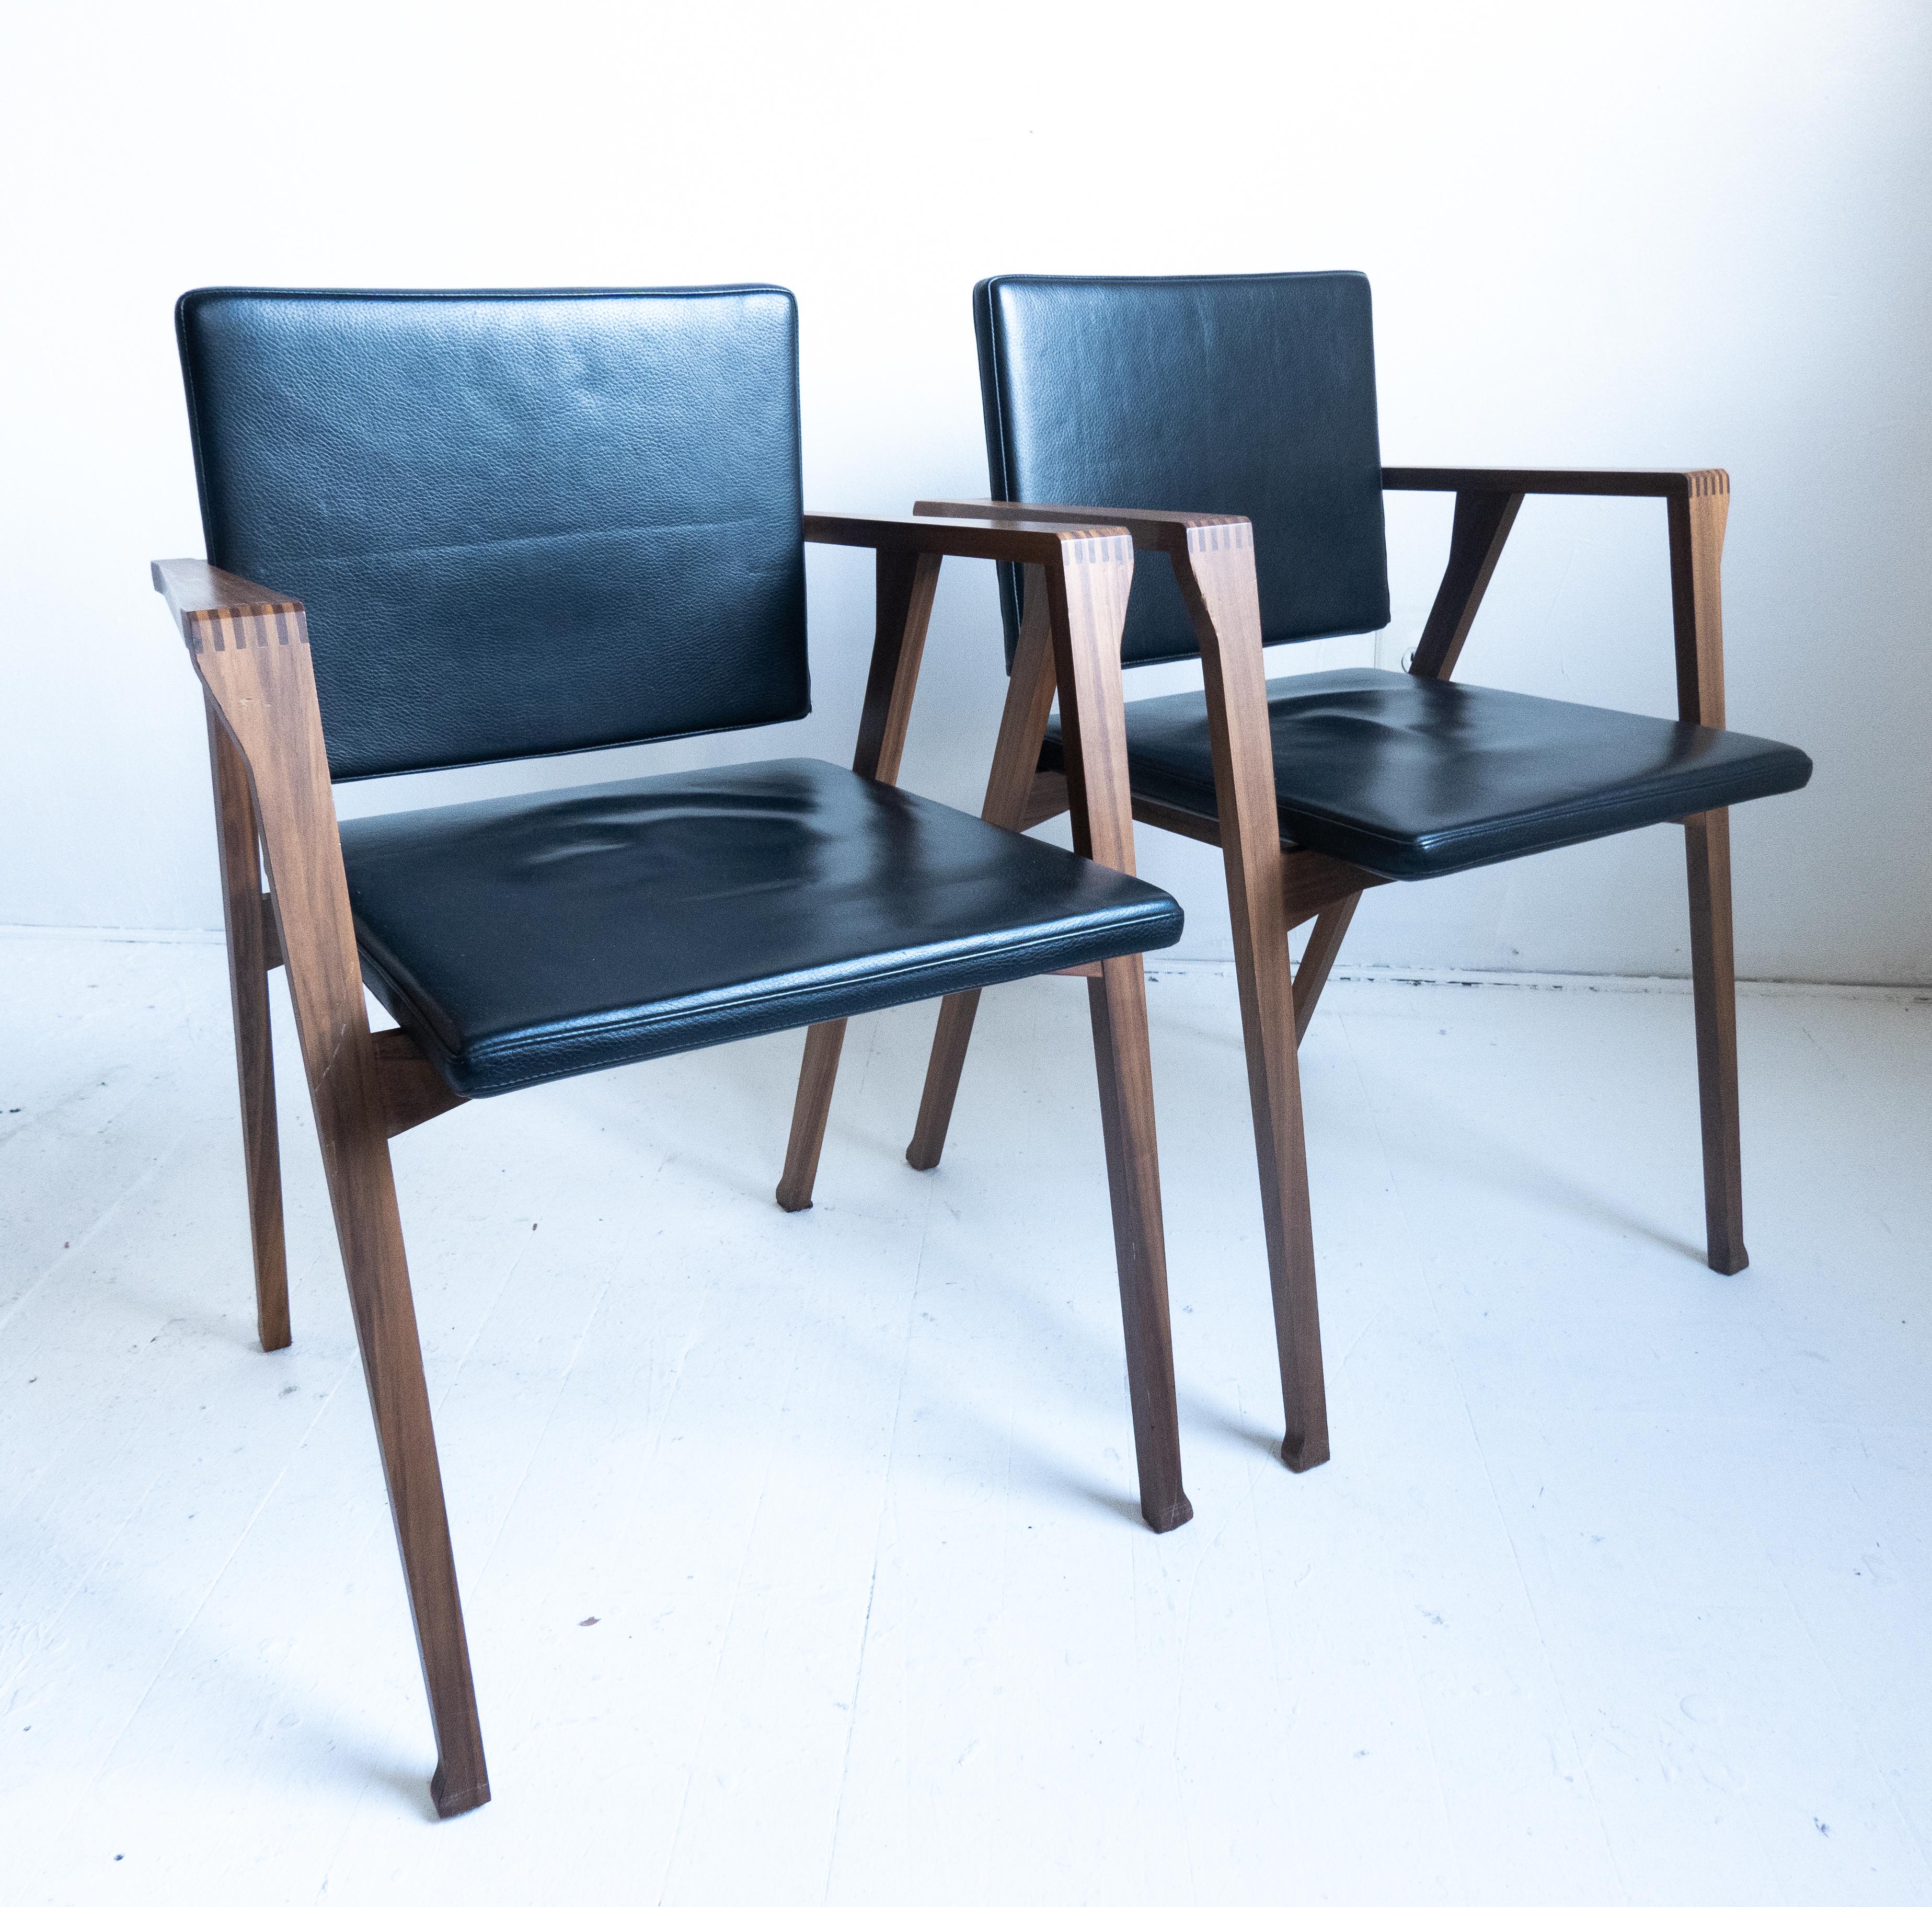 Italian Set of 4, Cassina “Luisa” Dining Chairs Black Leather